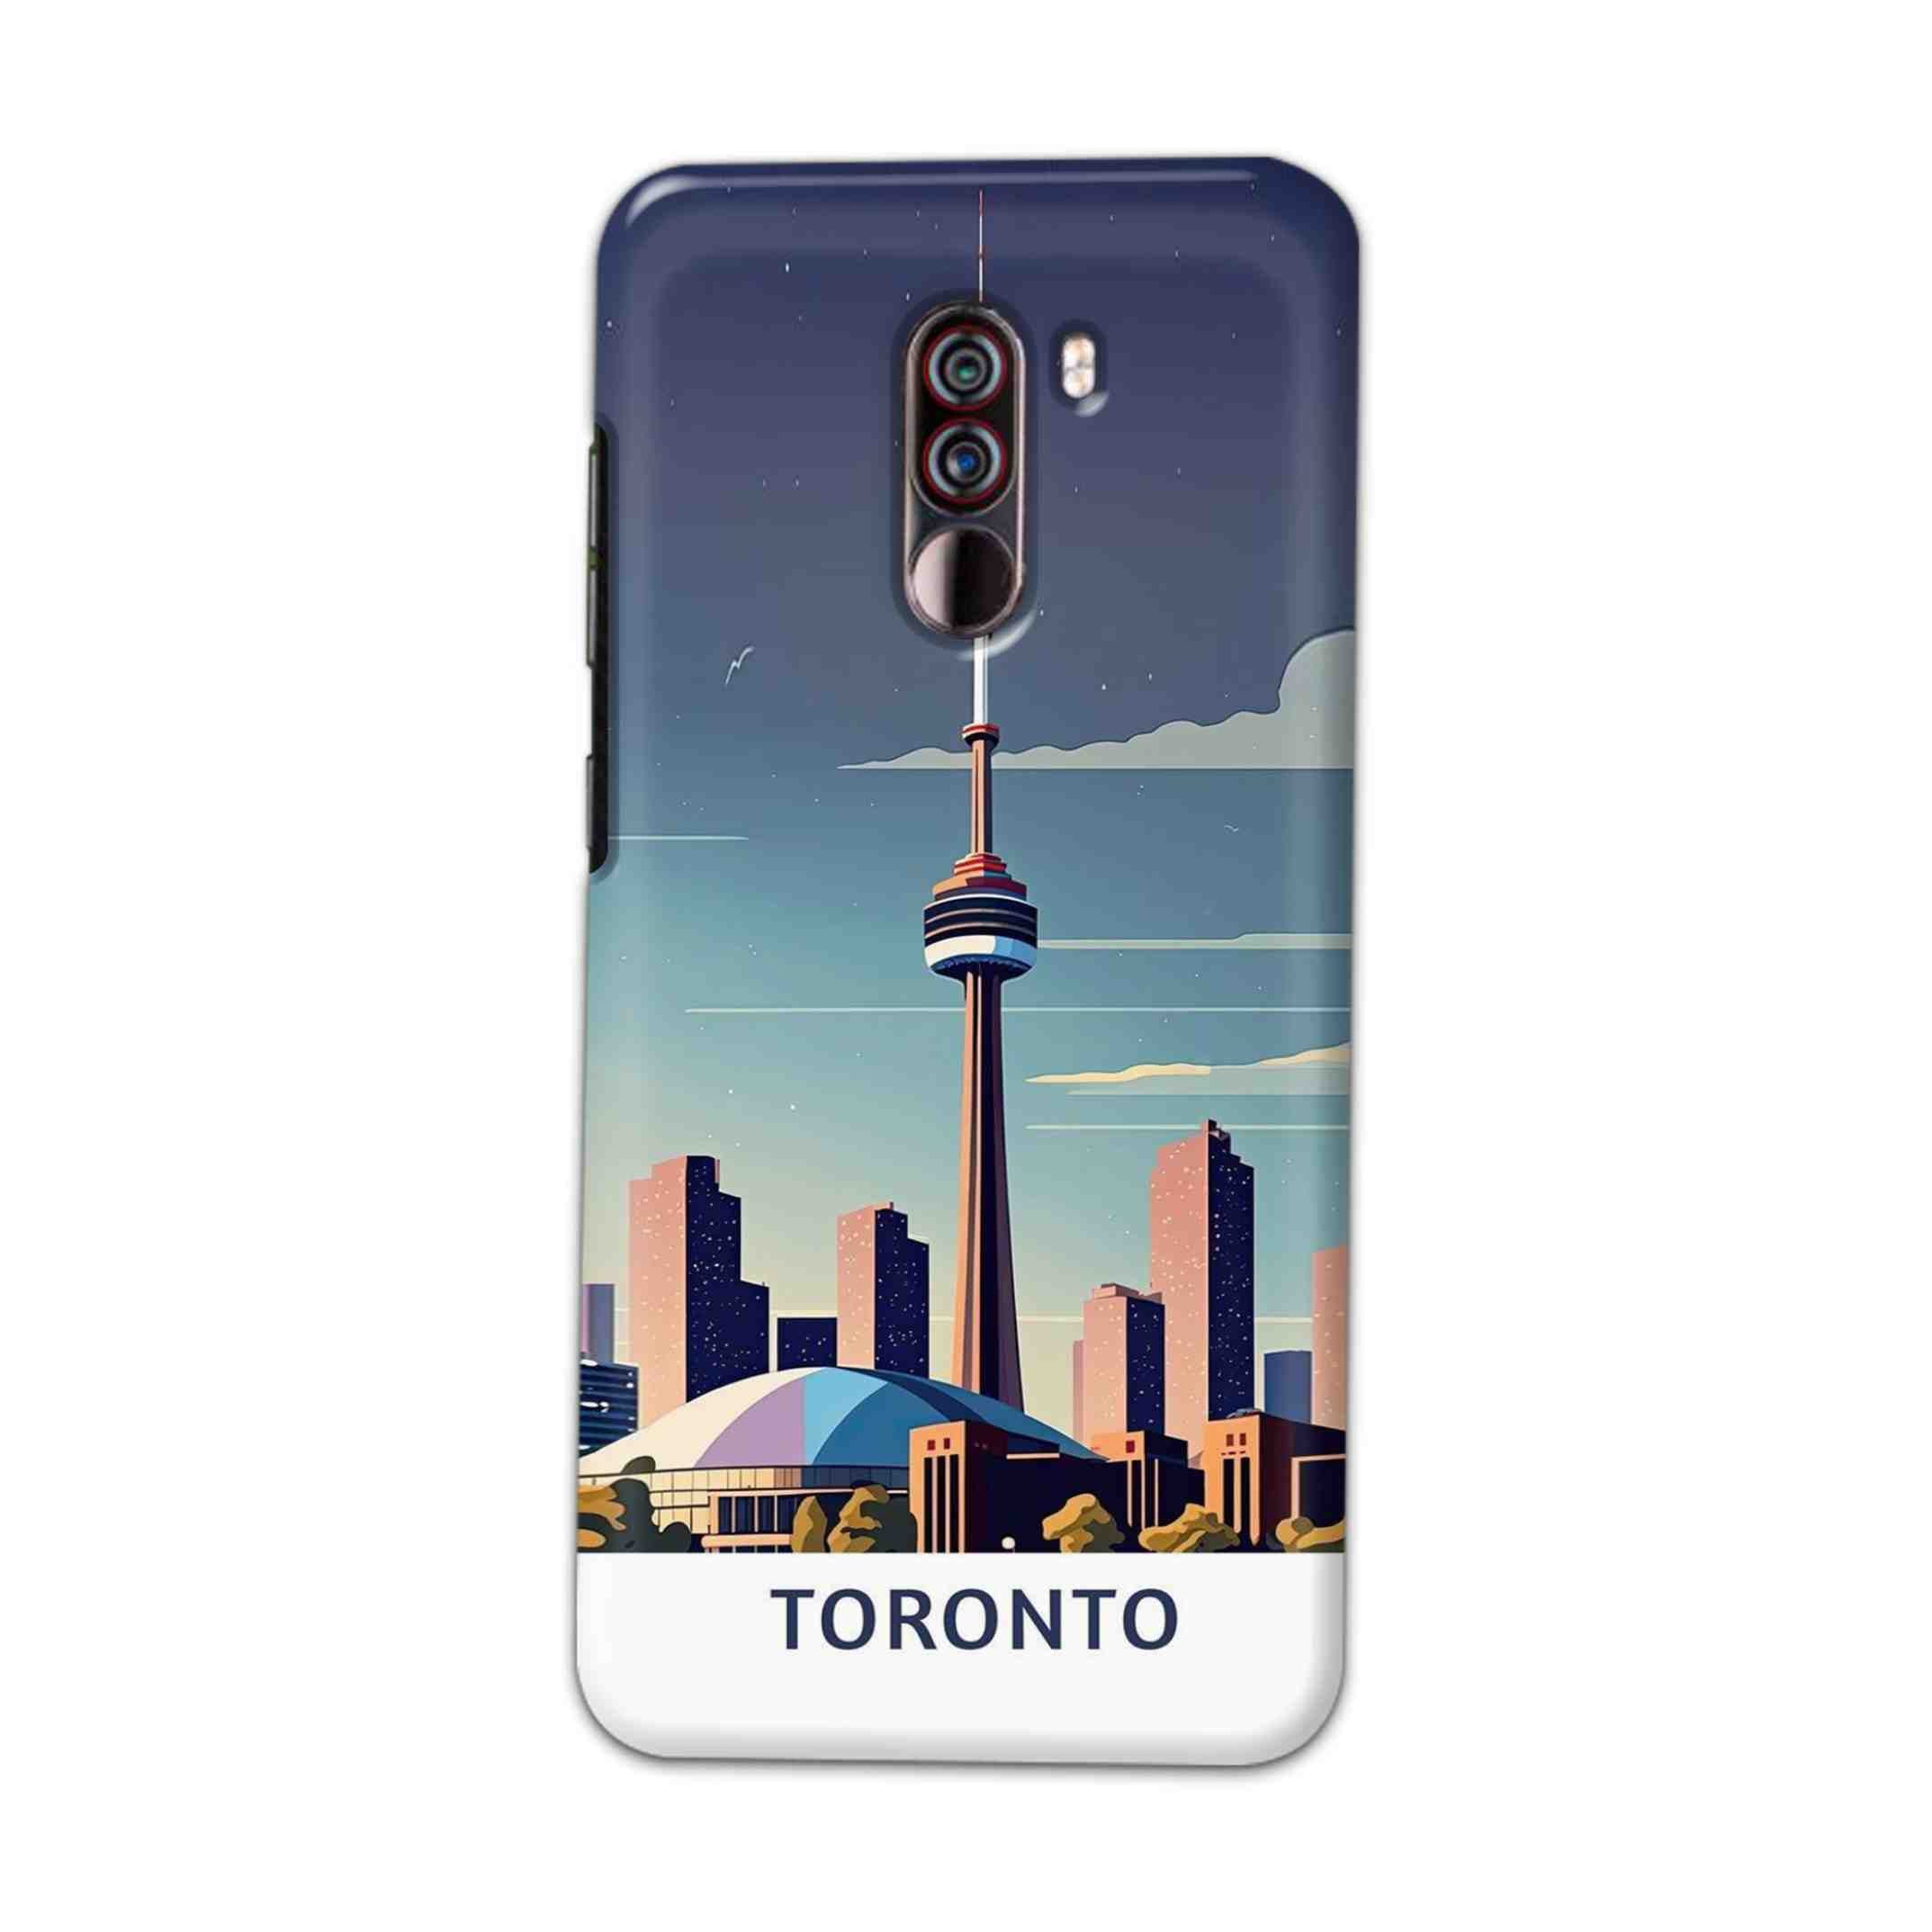 Buy Toronto Hard Back Mobile Phone Case Cover For Xiaomi Pocophone F1 Online